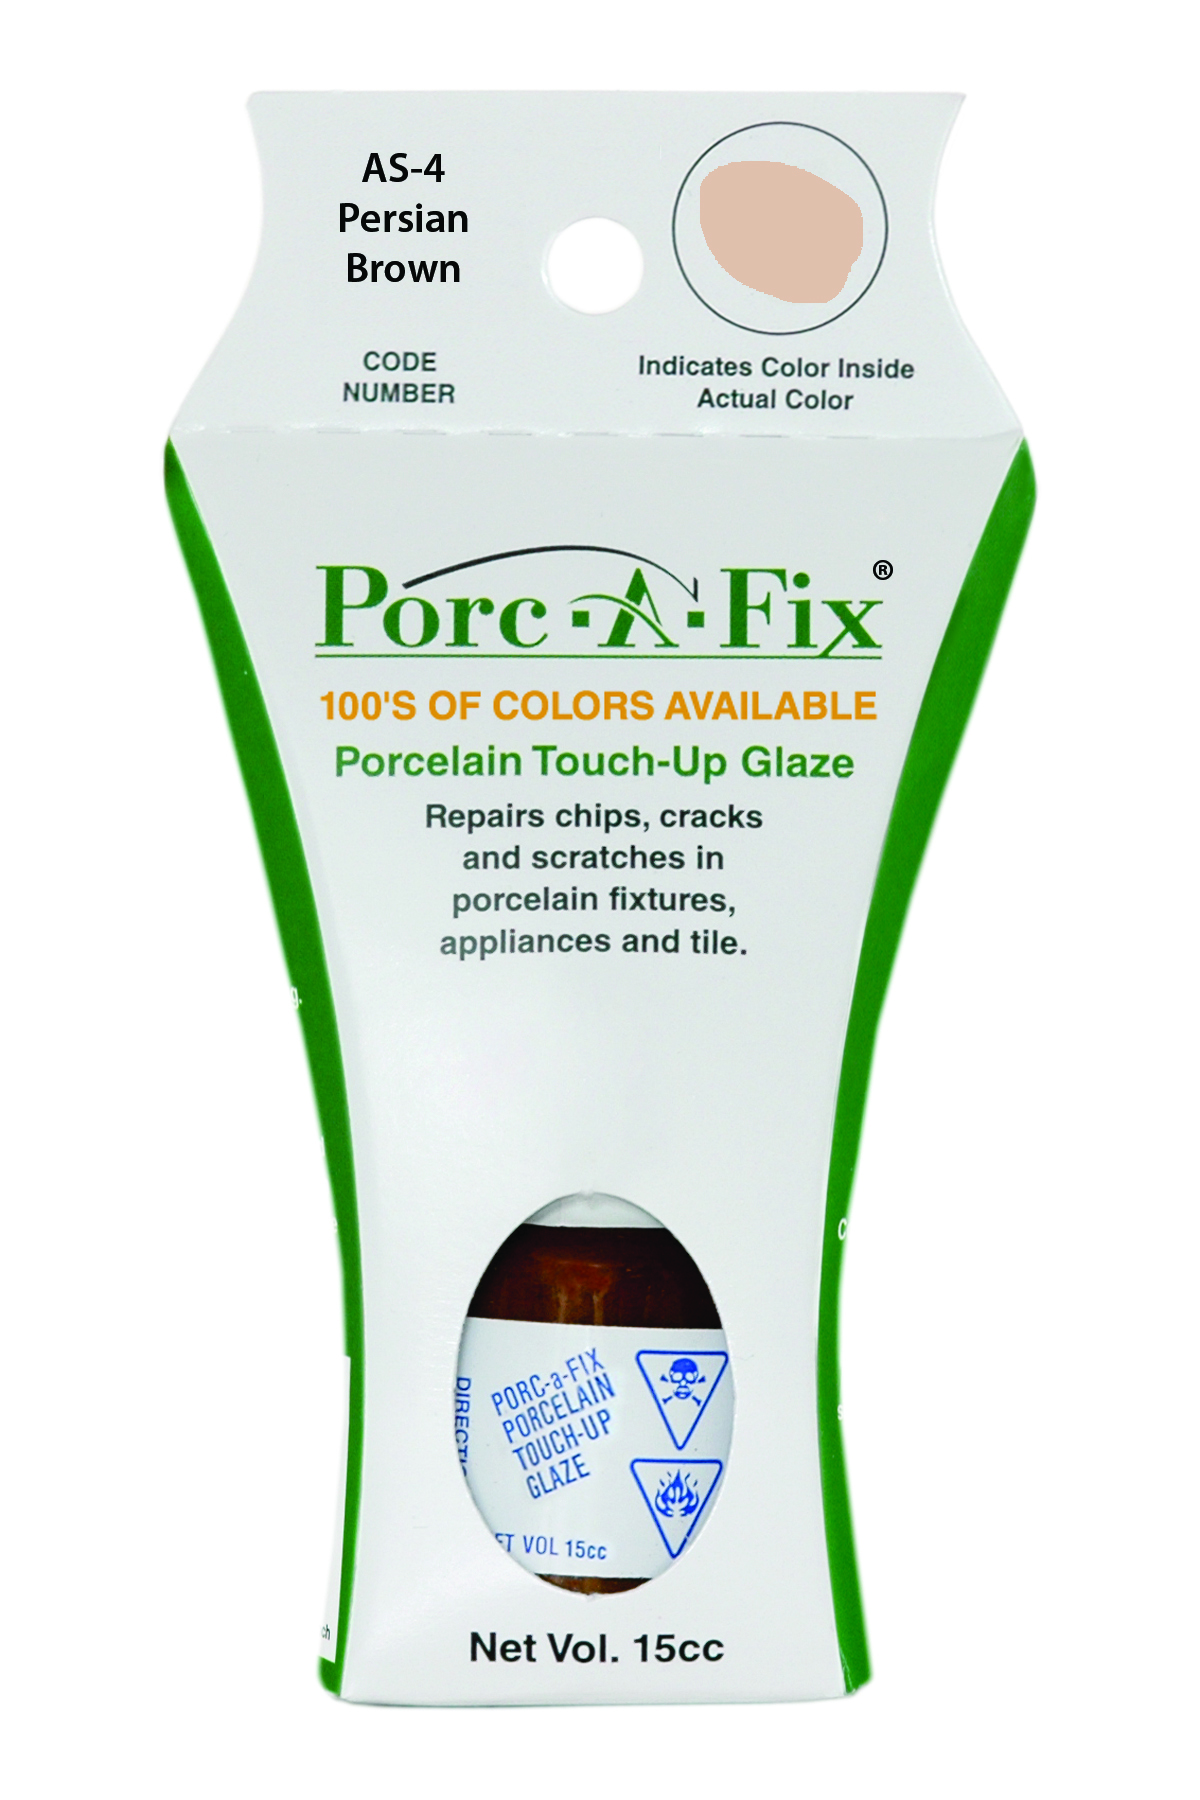 Fixture-Fix | AS-4 | Porc-A-Fix Touch-Up Glaze American Standard Persian Brown- Compatible with American Standard 070900-0310A Touch Up Paint Kit - PERSIAN BROWN